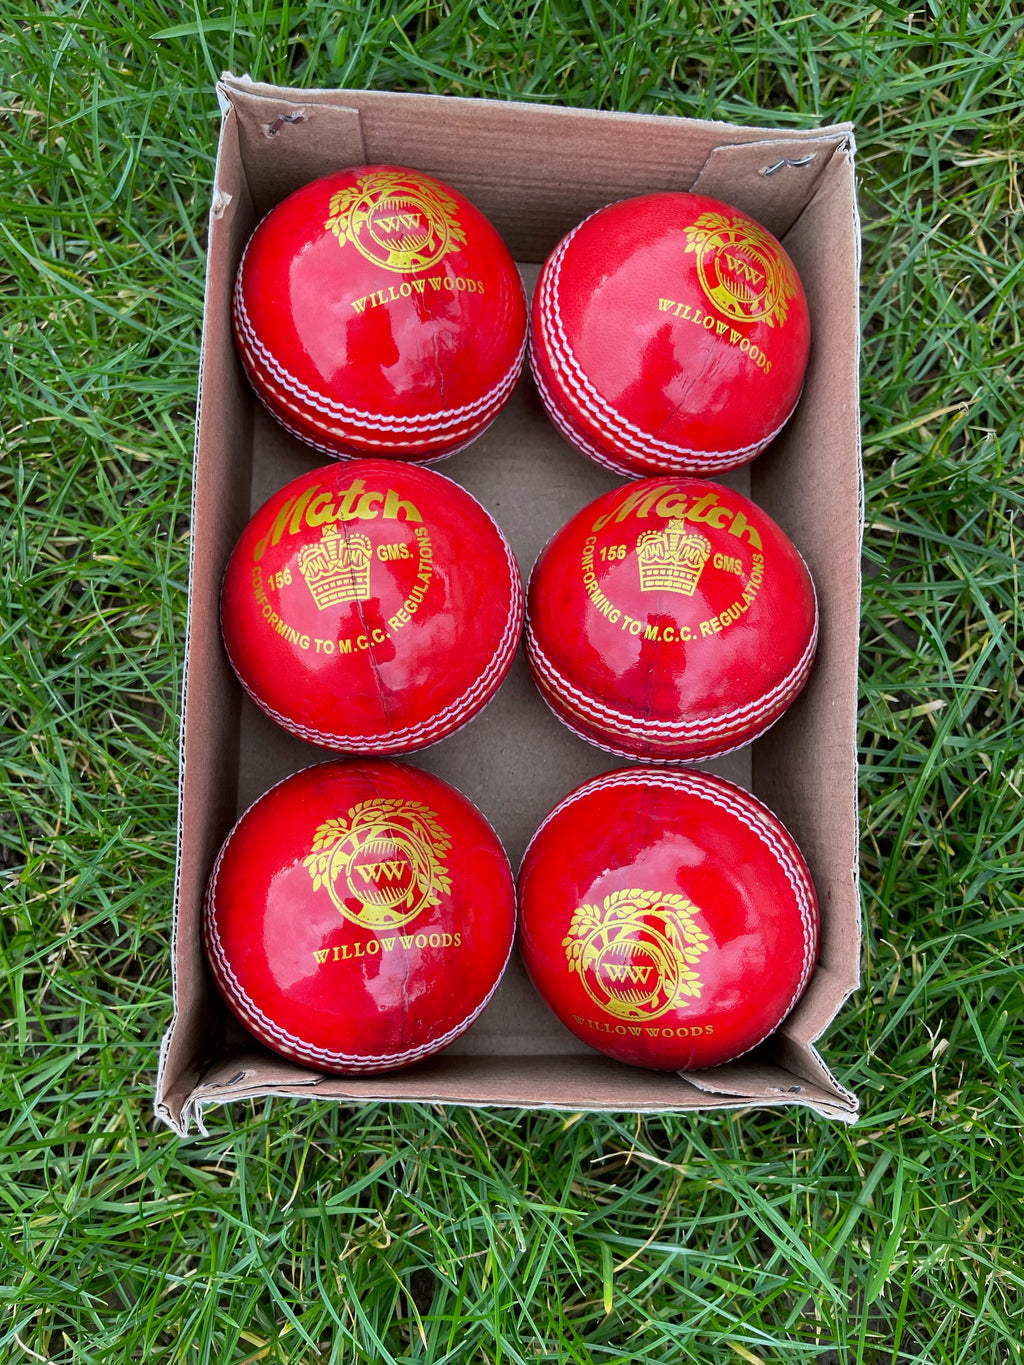 Willow Woods Cricket Ball Match pack of 6